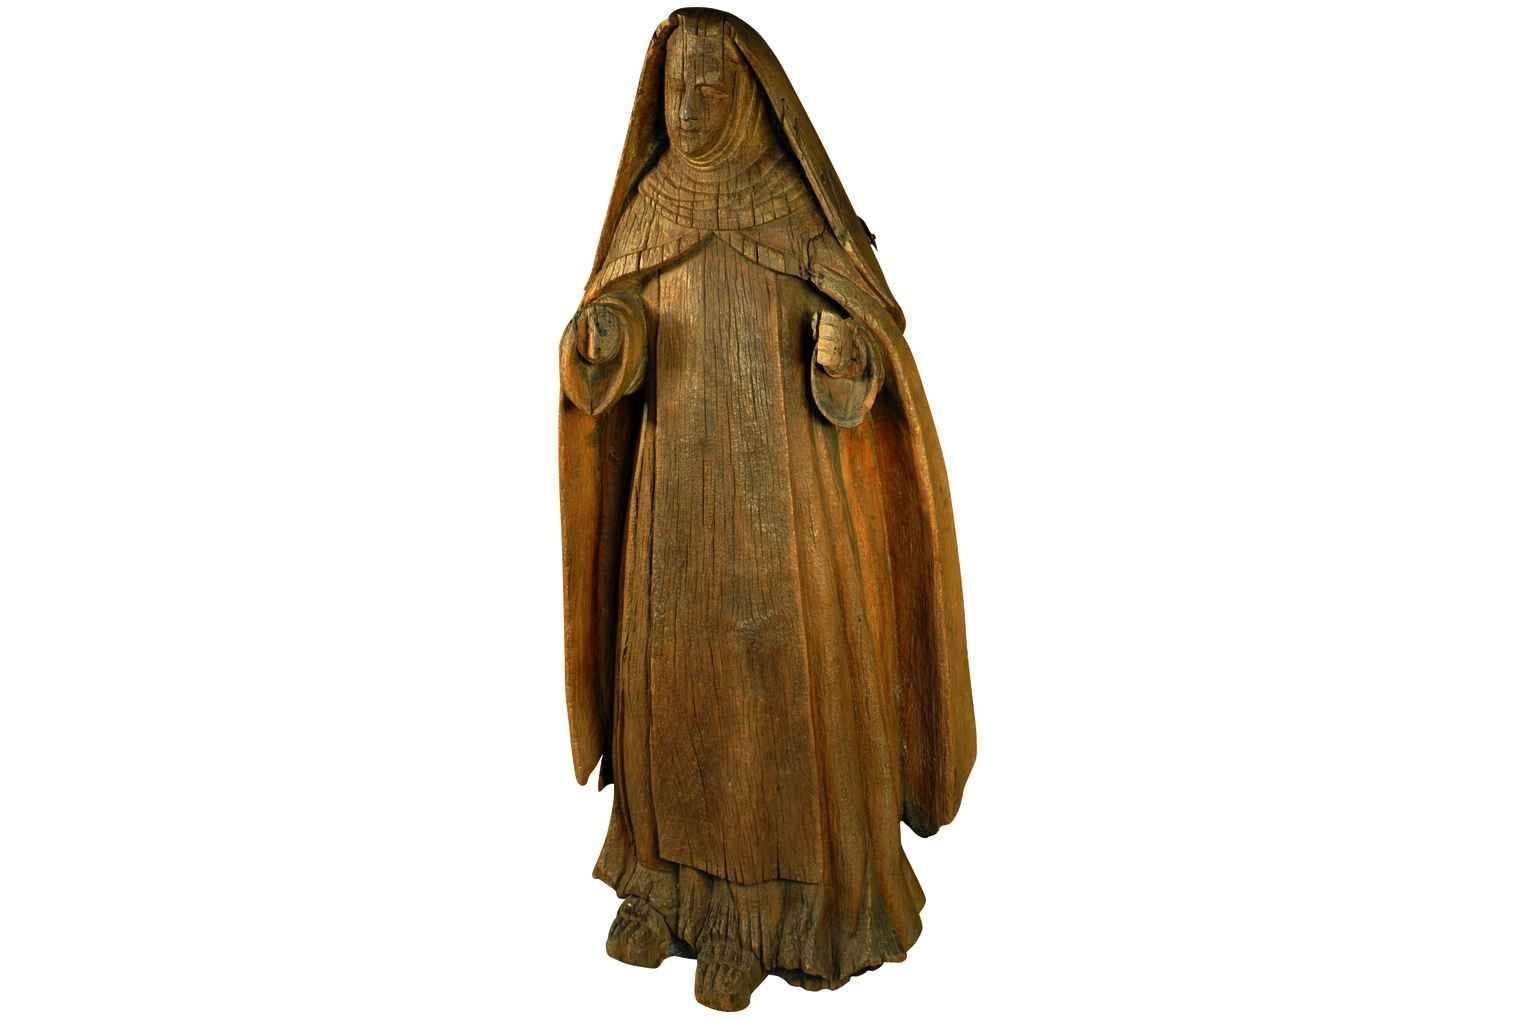 A wonderfully primitive Italian statue of Saint Anne - the mother of the Virgin Mary.  She is carved from a solid tree trunk.  Having been exposed to centuries of weather, here Saint Anne is beautifully tranquil. 